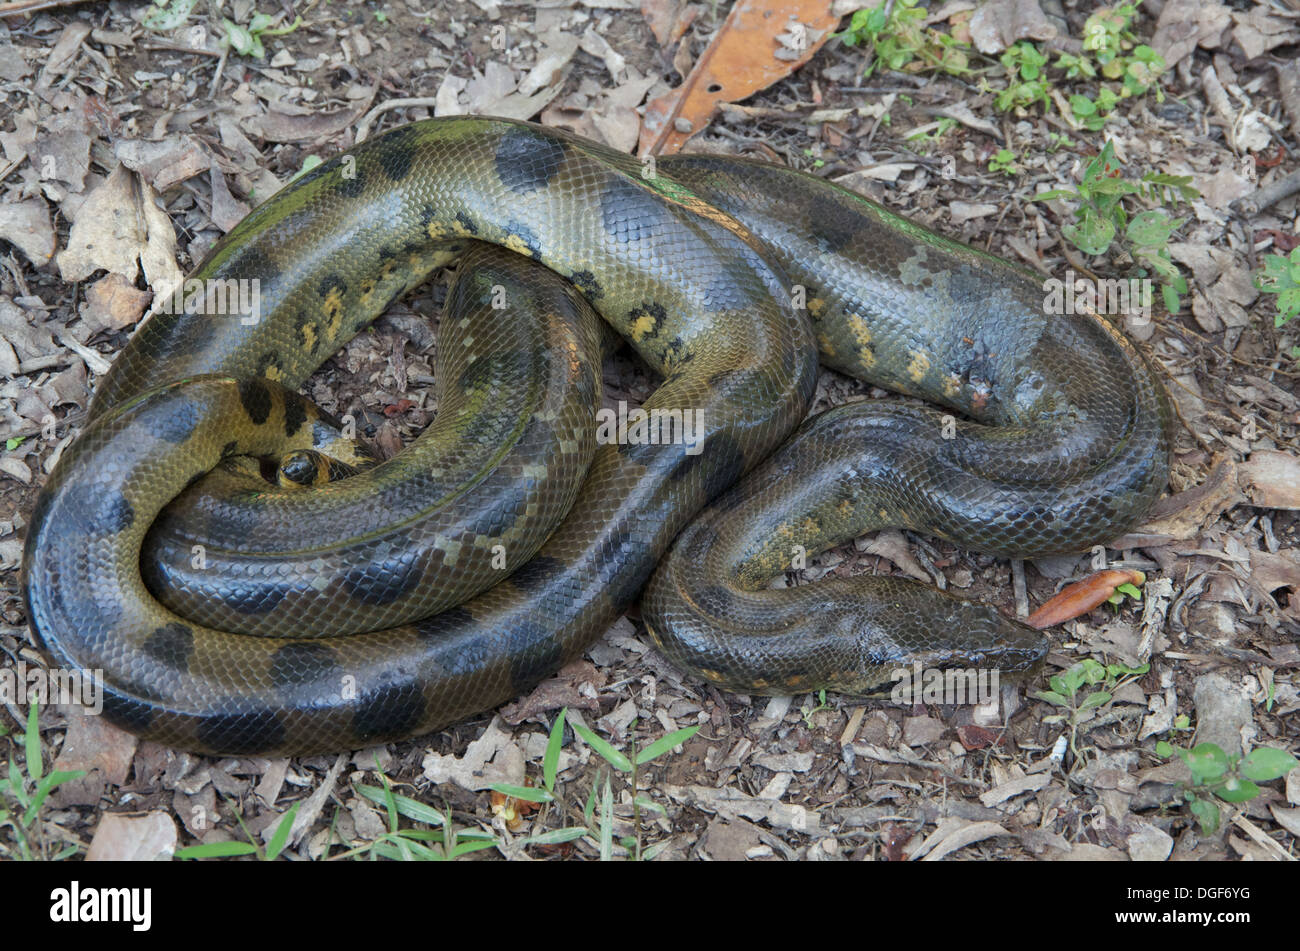 Green Anaconda Rainforest High Resolution Stock Photography And Images Alamy